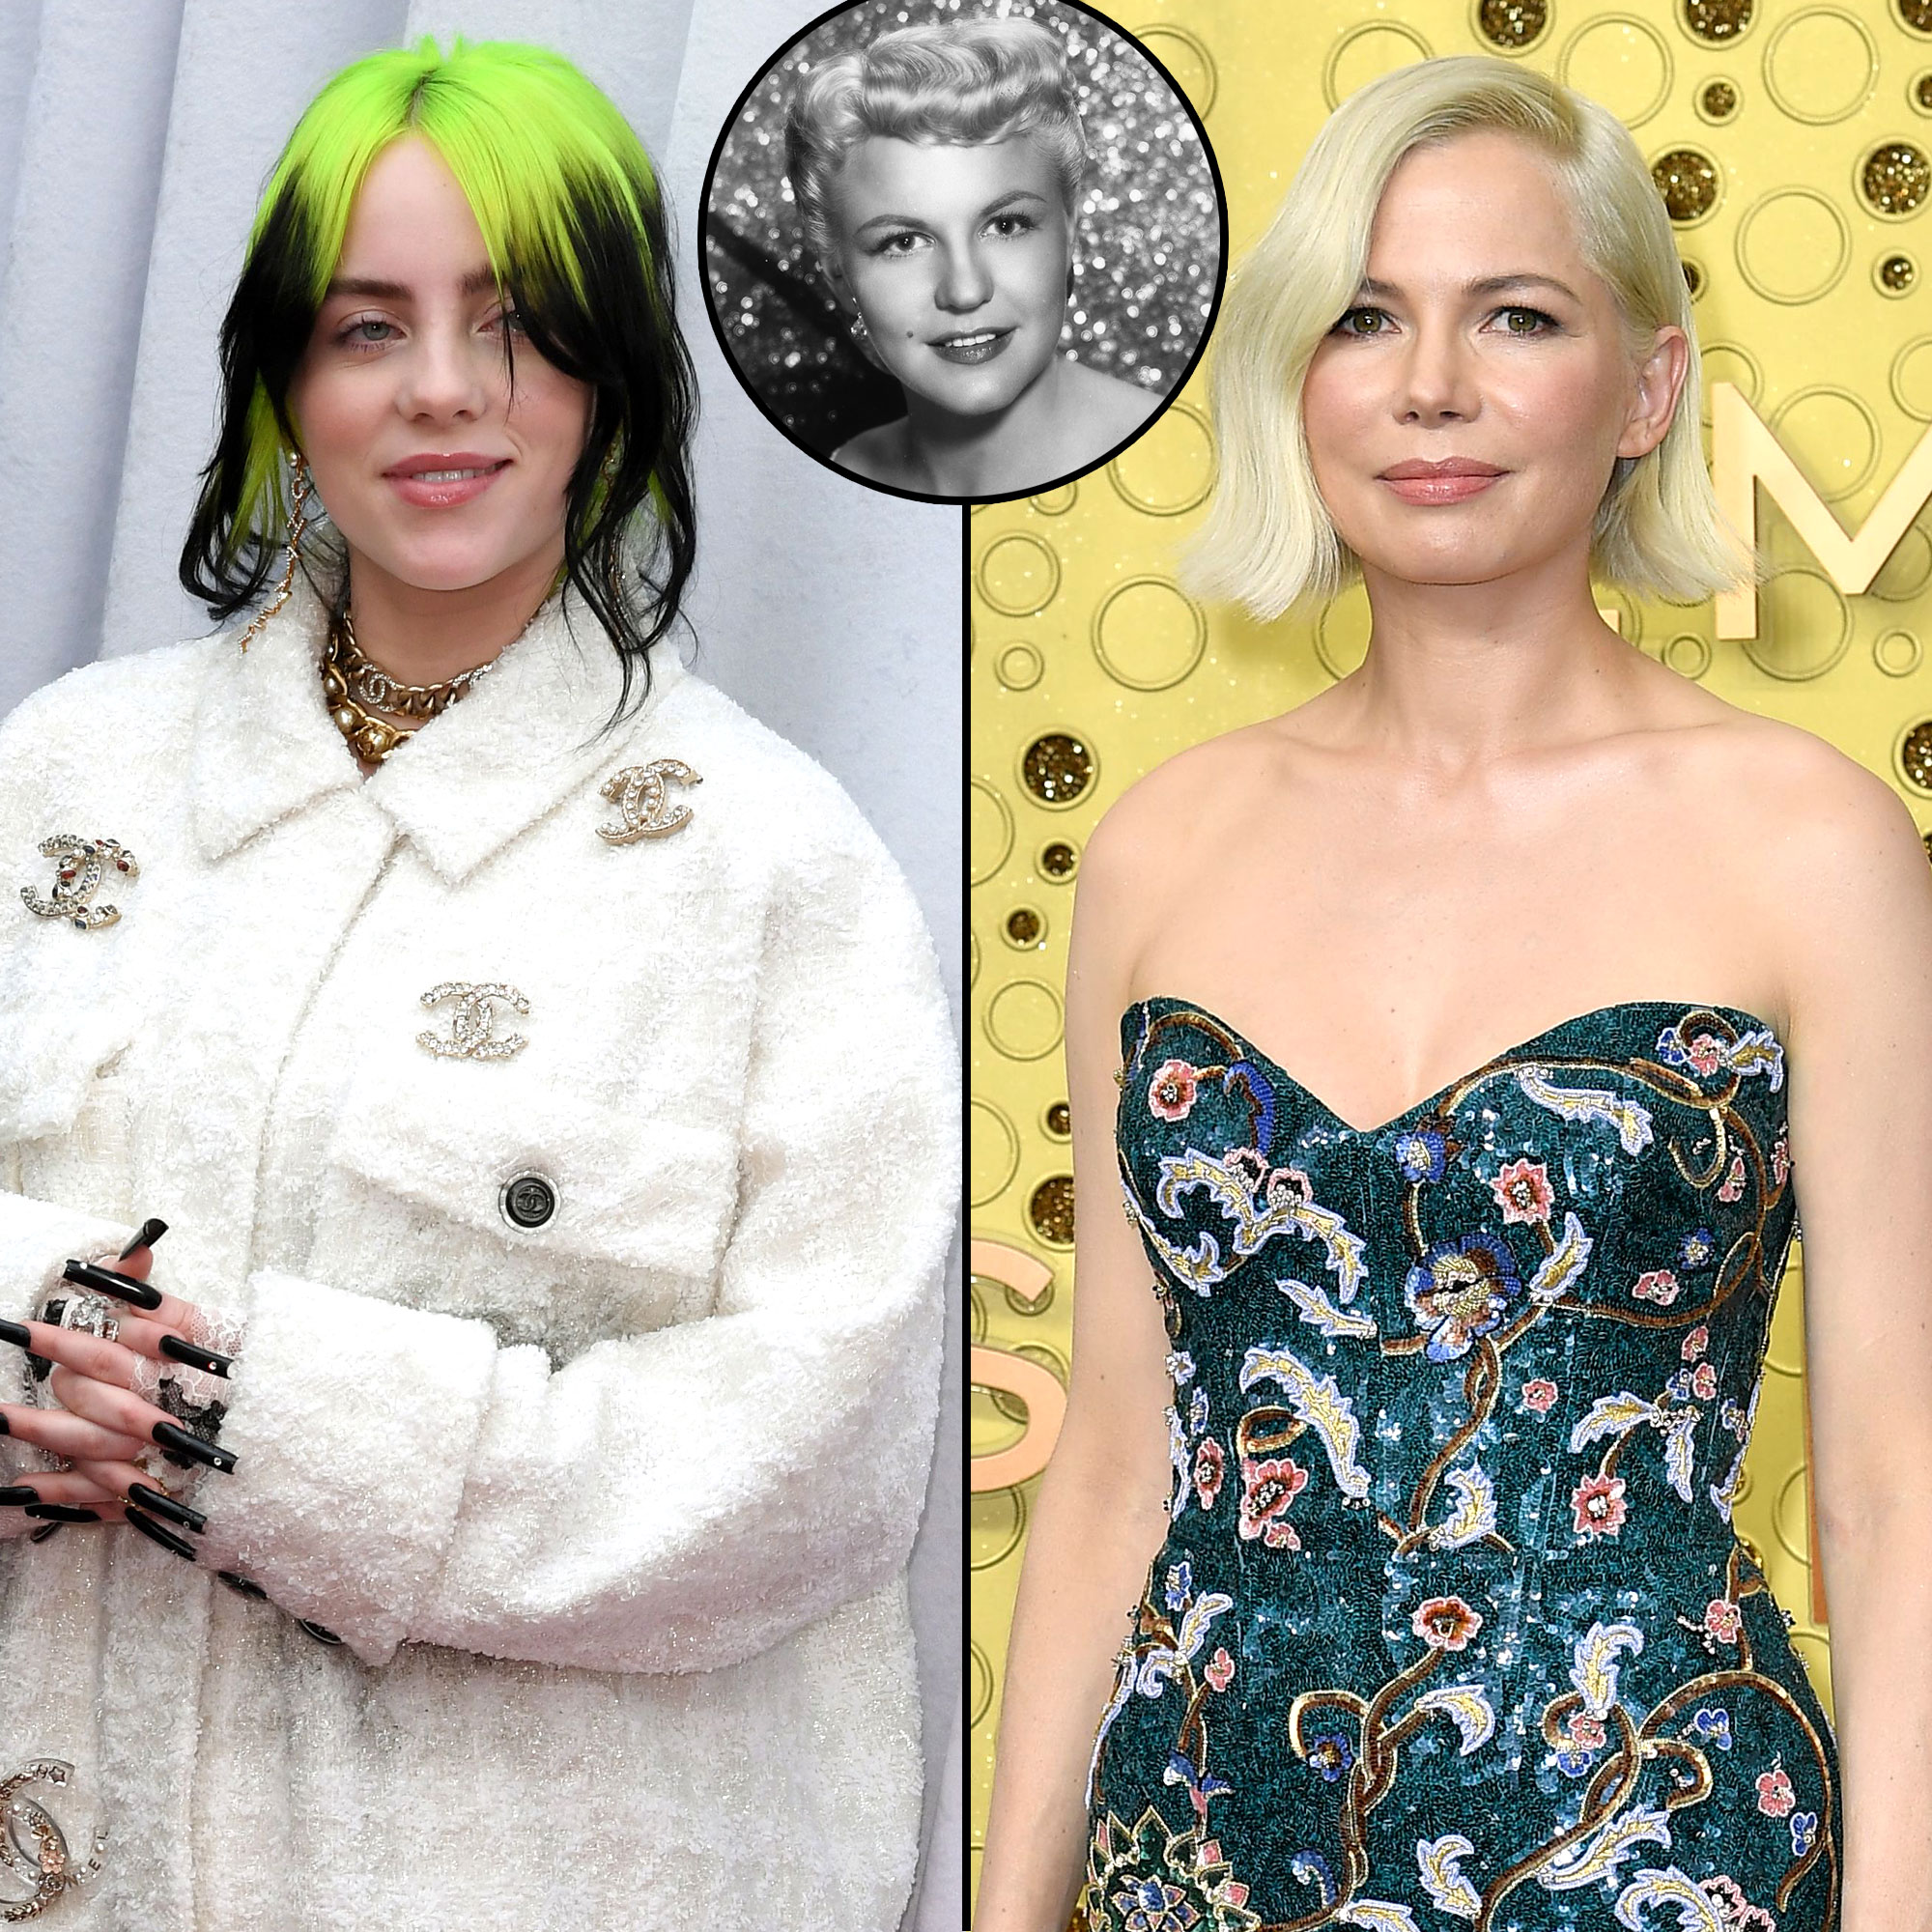 Billie Eilish May Produce Peggy Lee Biopic With Michelle Williams